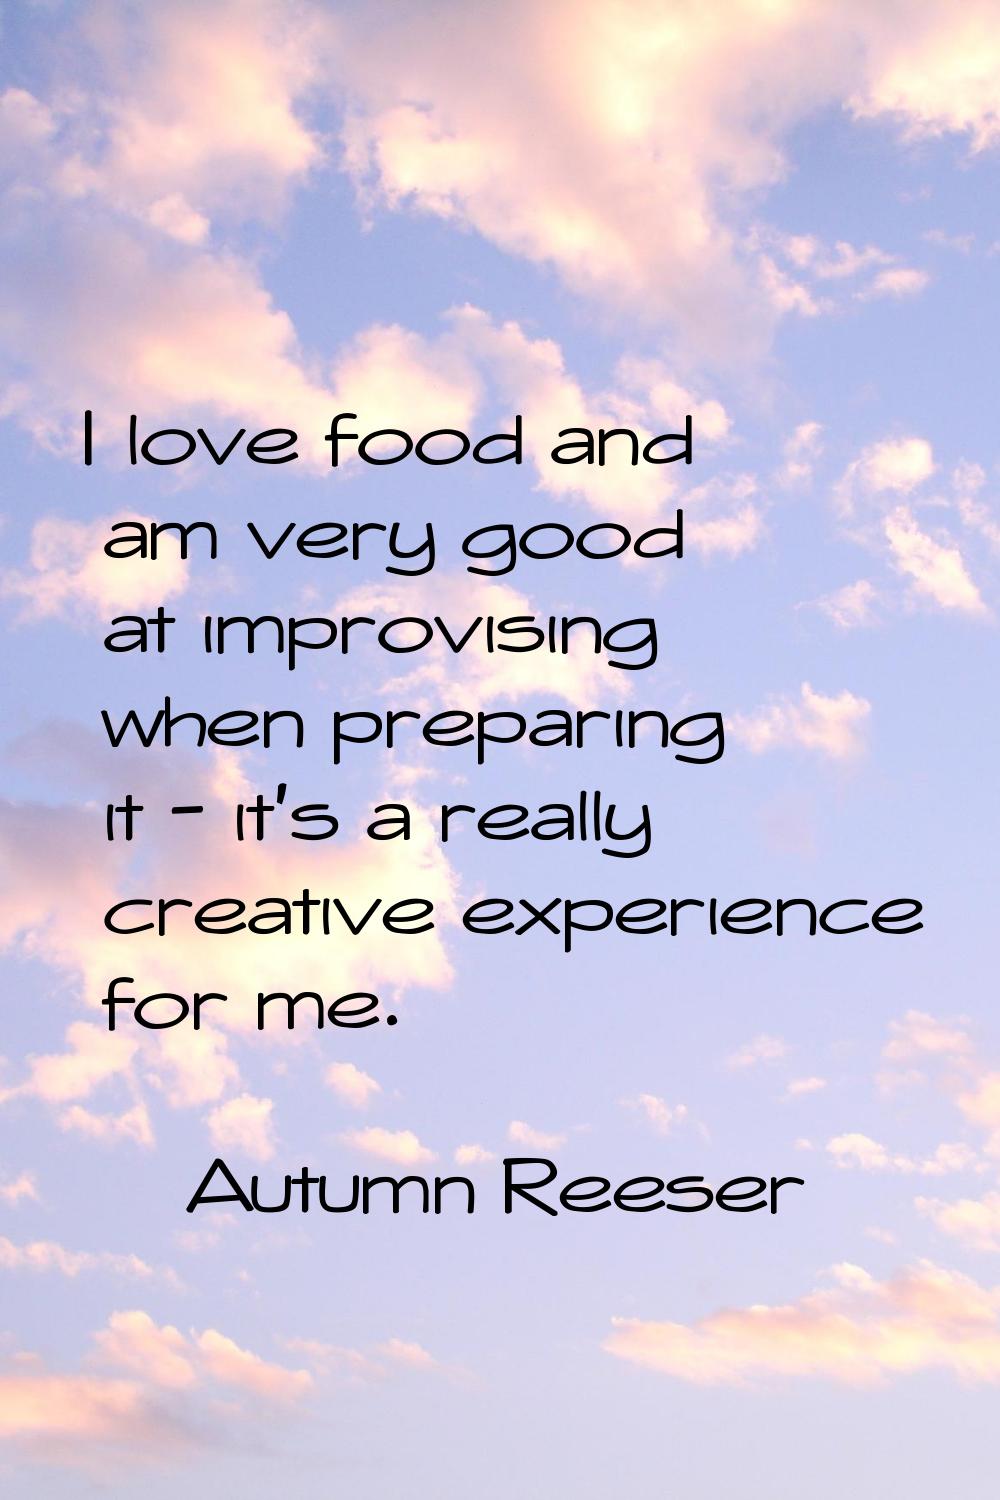 I love food and am very good at improvising when preparing it - it's a really creative experience f